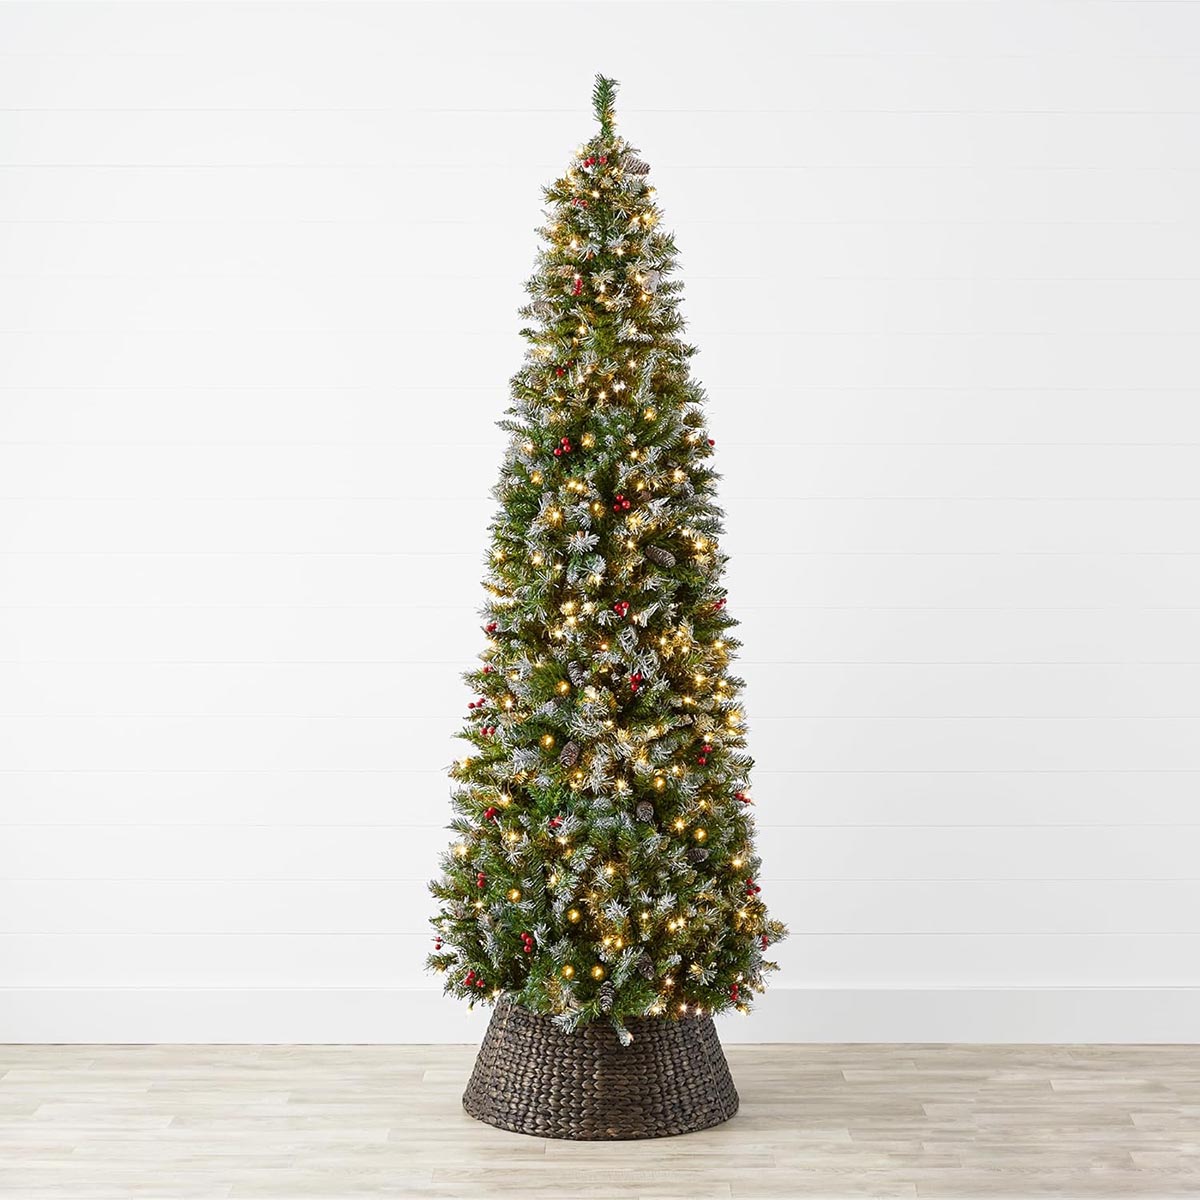 The Best Choice Products Spruce w/ Berries, Pine Cones in a dark wicker basket on a wood floor in front of a white wall.